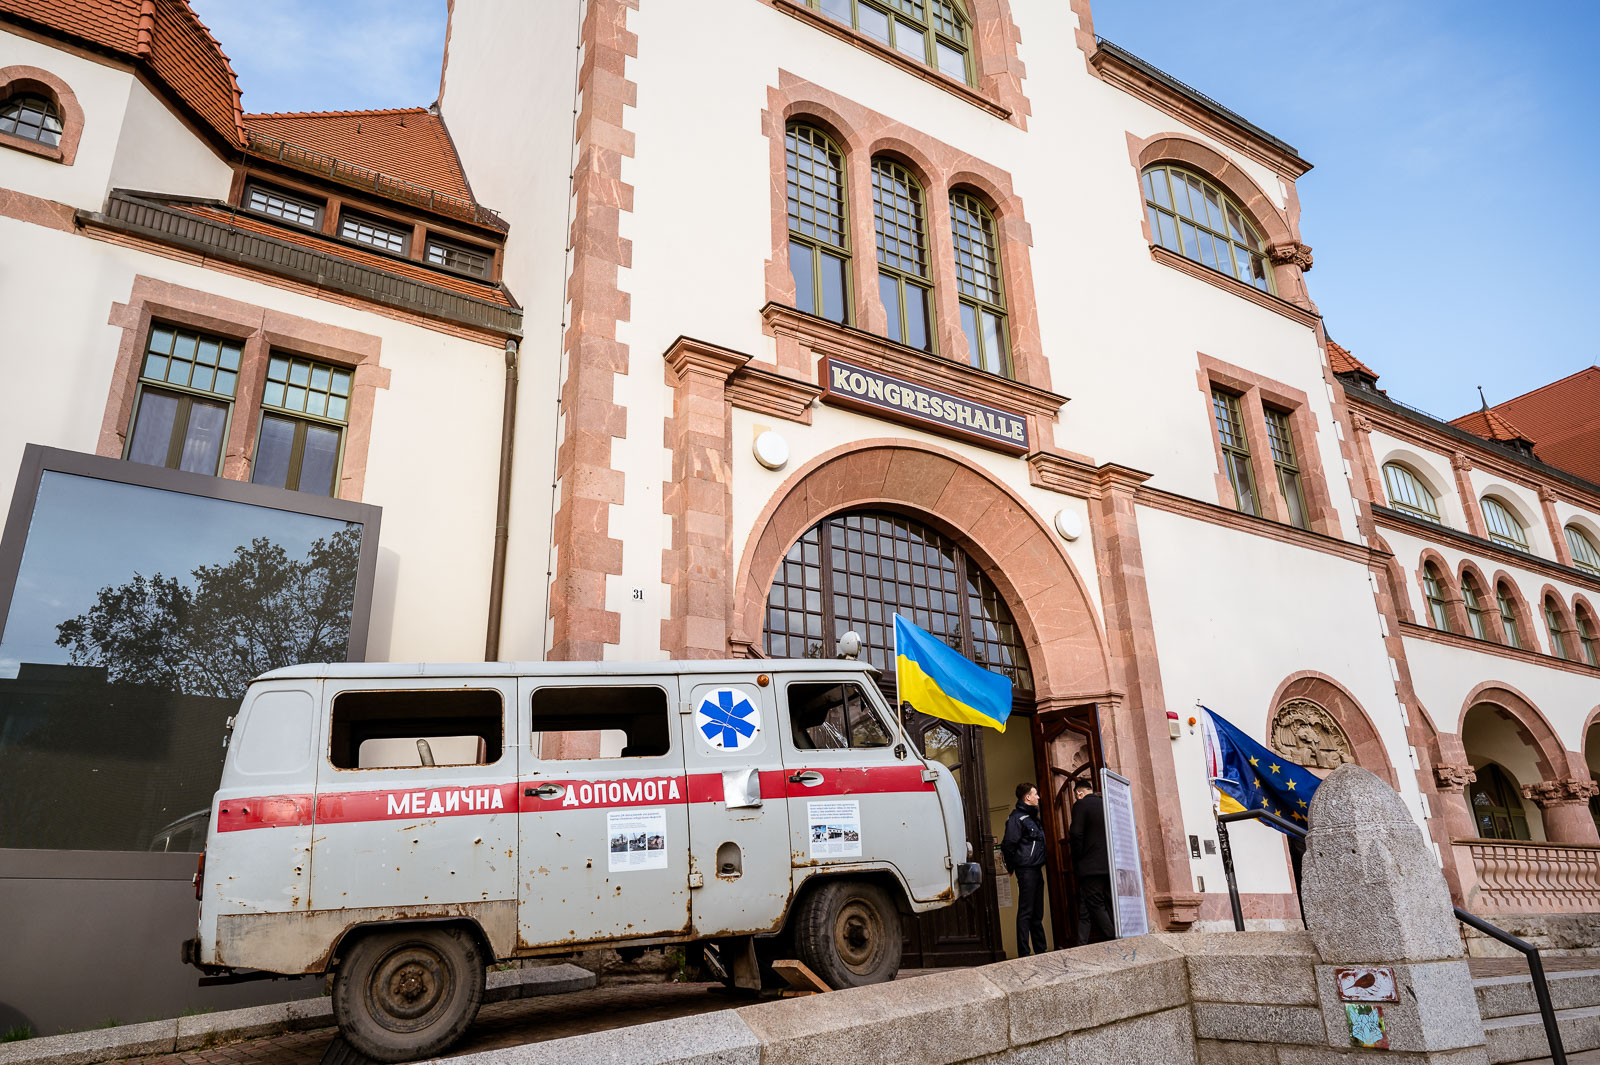 A destroyed ambulance from Ukraine stands in front of the Congress Hall in Leipzig, the venue for the German-Ukrainian municipal partnership conference.